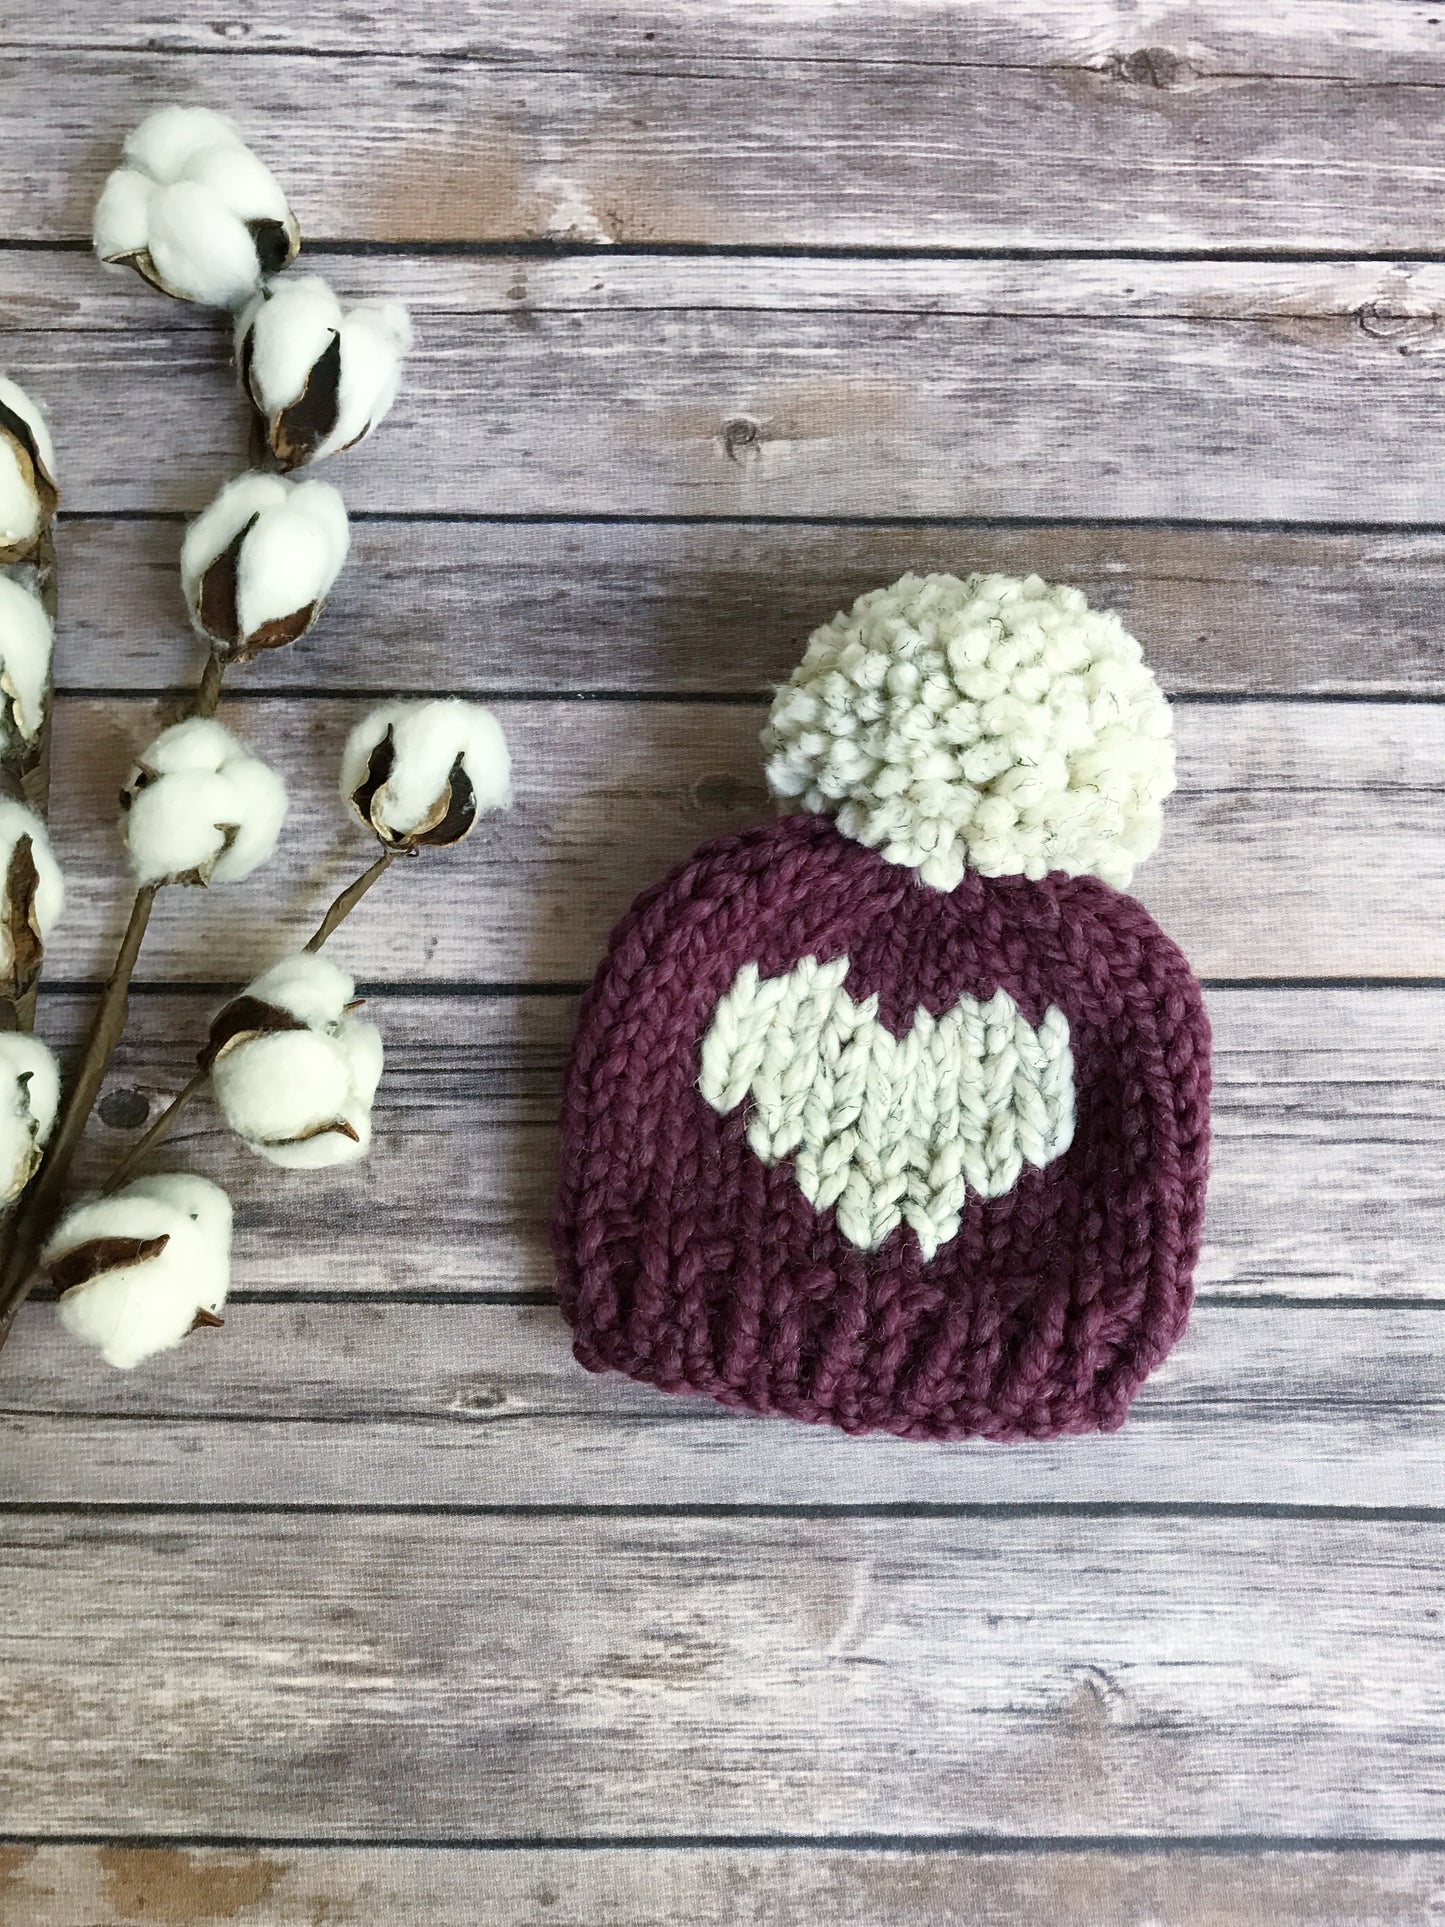 Mommy and Me Hats Knit Fair Isle Baby and Adult Beanie Yarn Pom Pom // Hearts